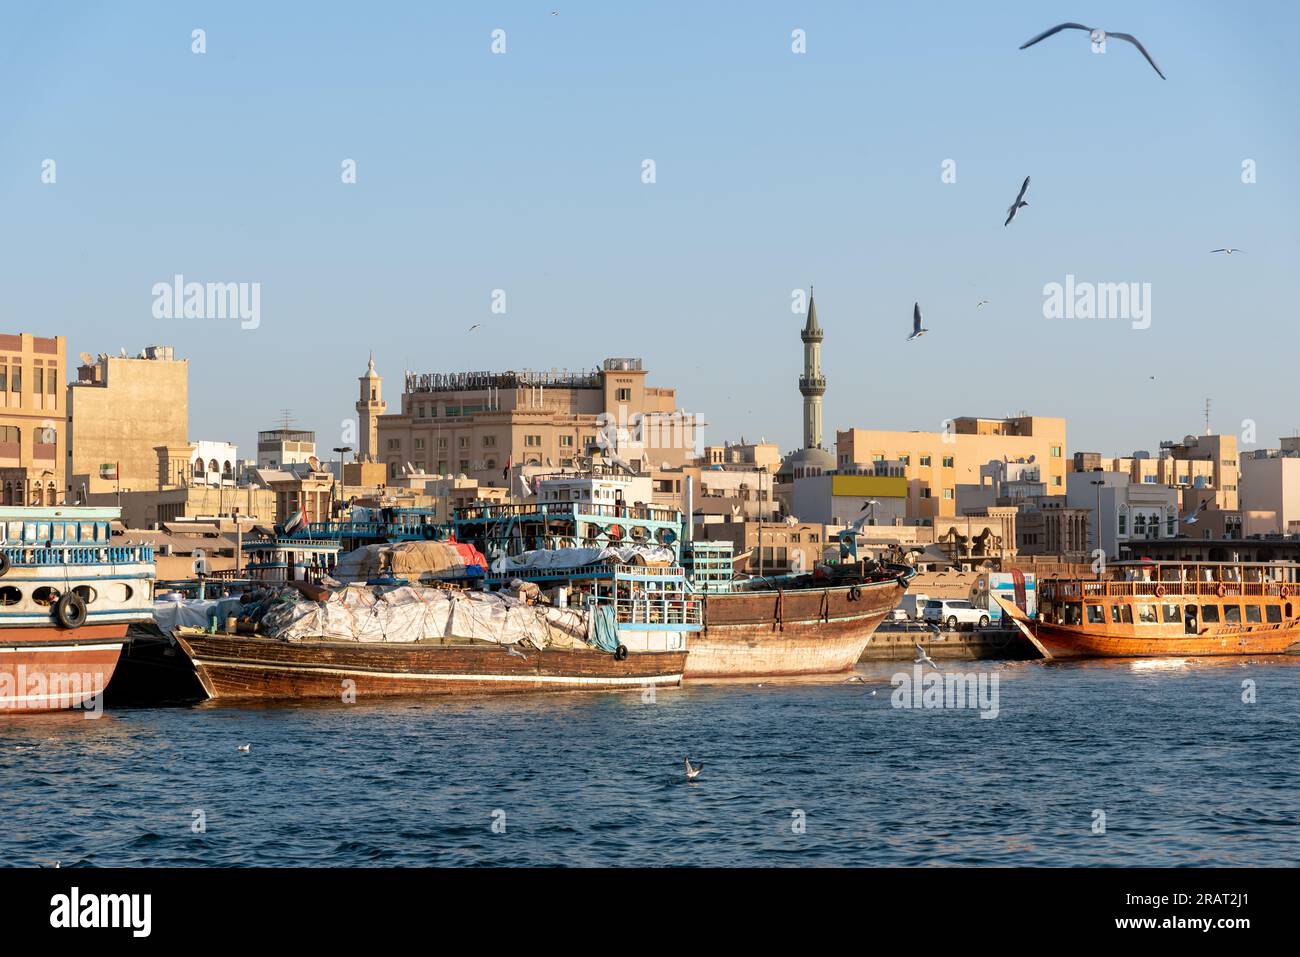 Panoramic view of traditional boat taxi in Dubai Creek Stock Photo